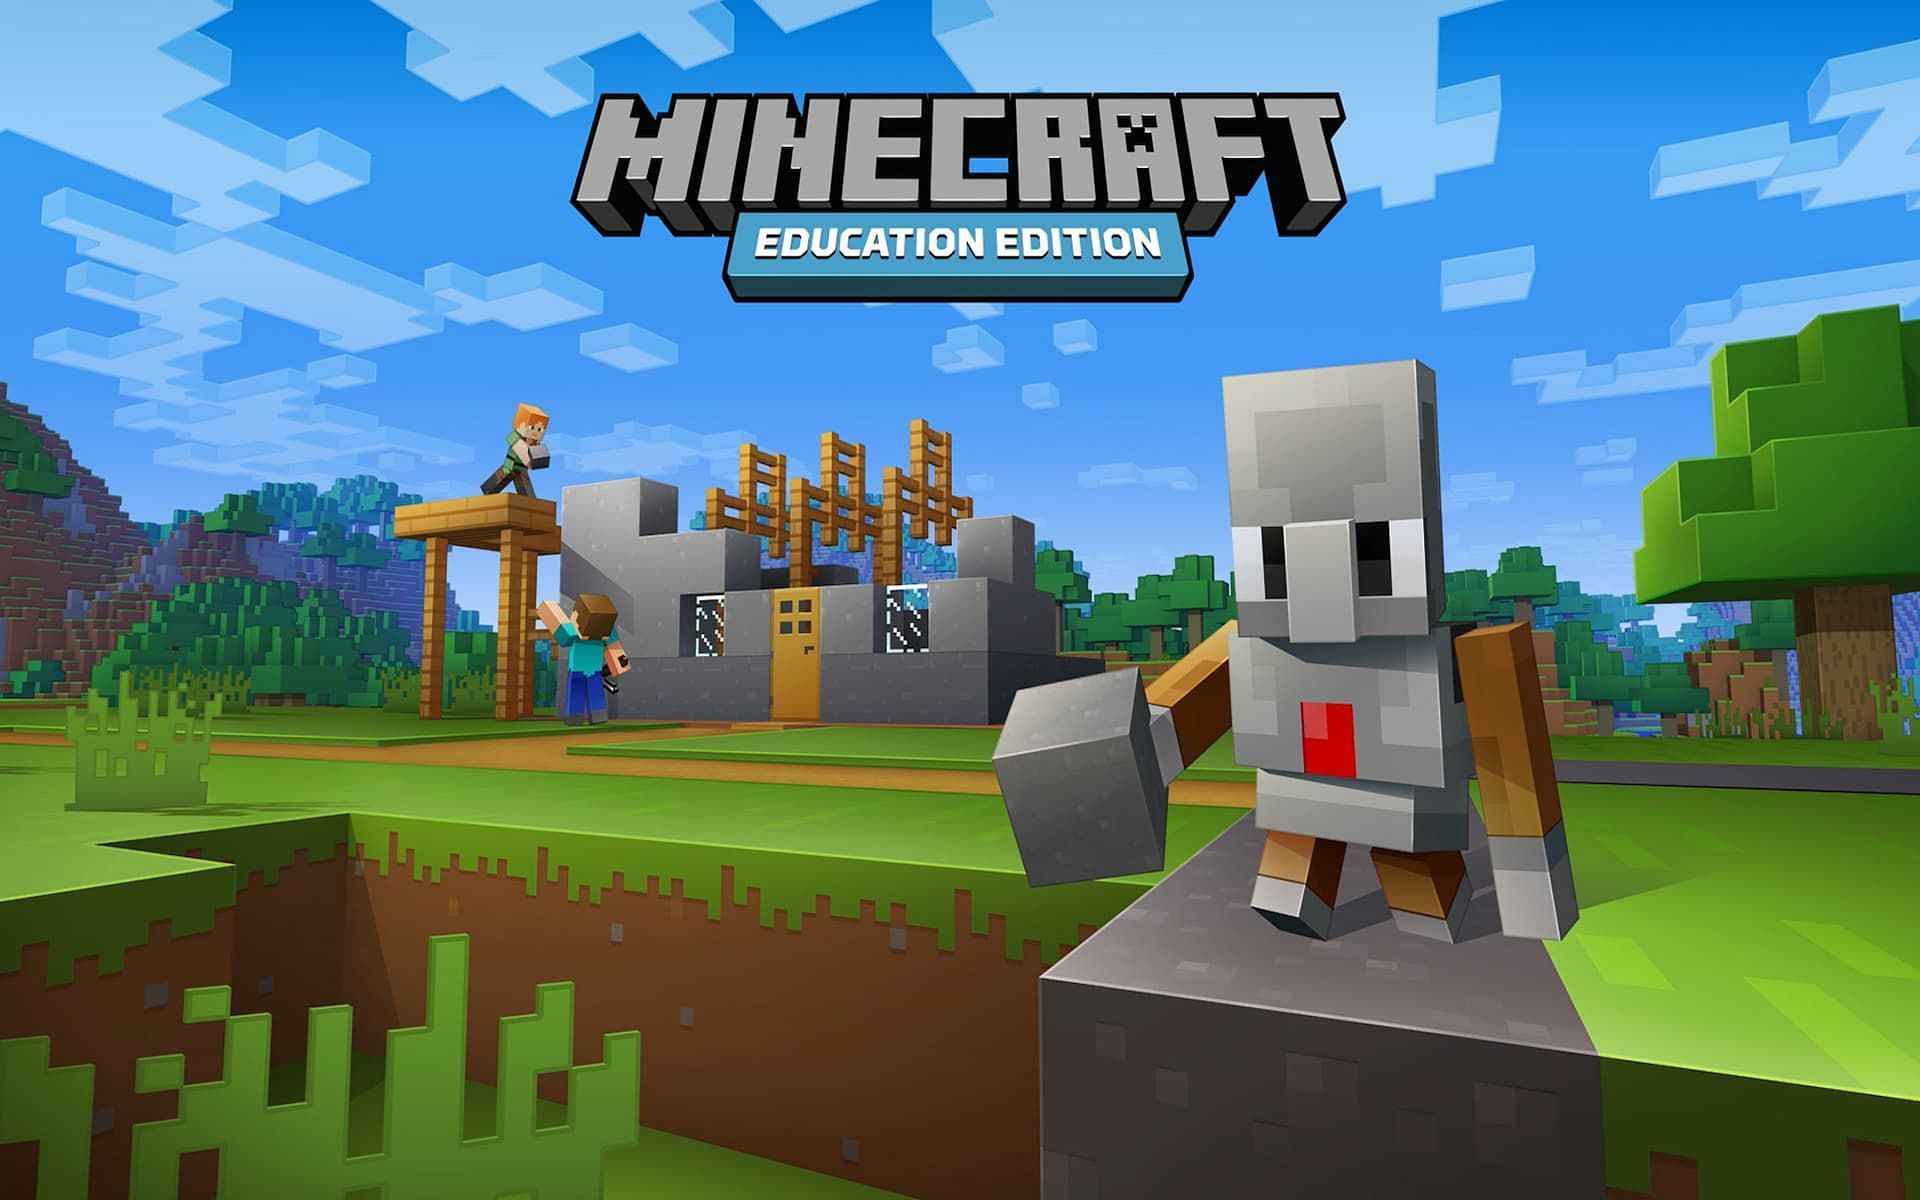 Minecraft Education Edition can allow players to learn in the exciting and blocky world of Minecraft (Image via Minecraft.net)